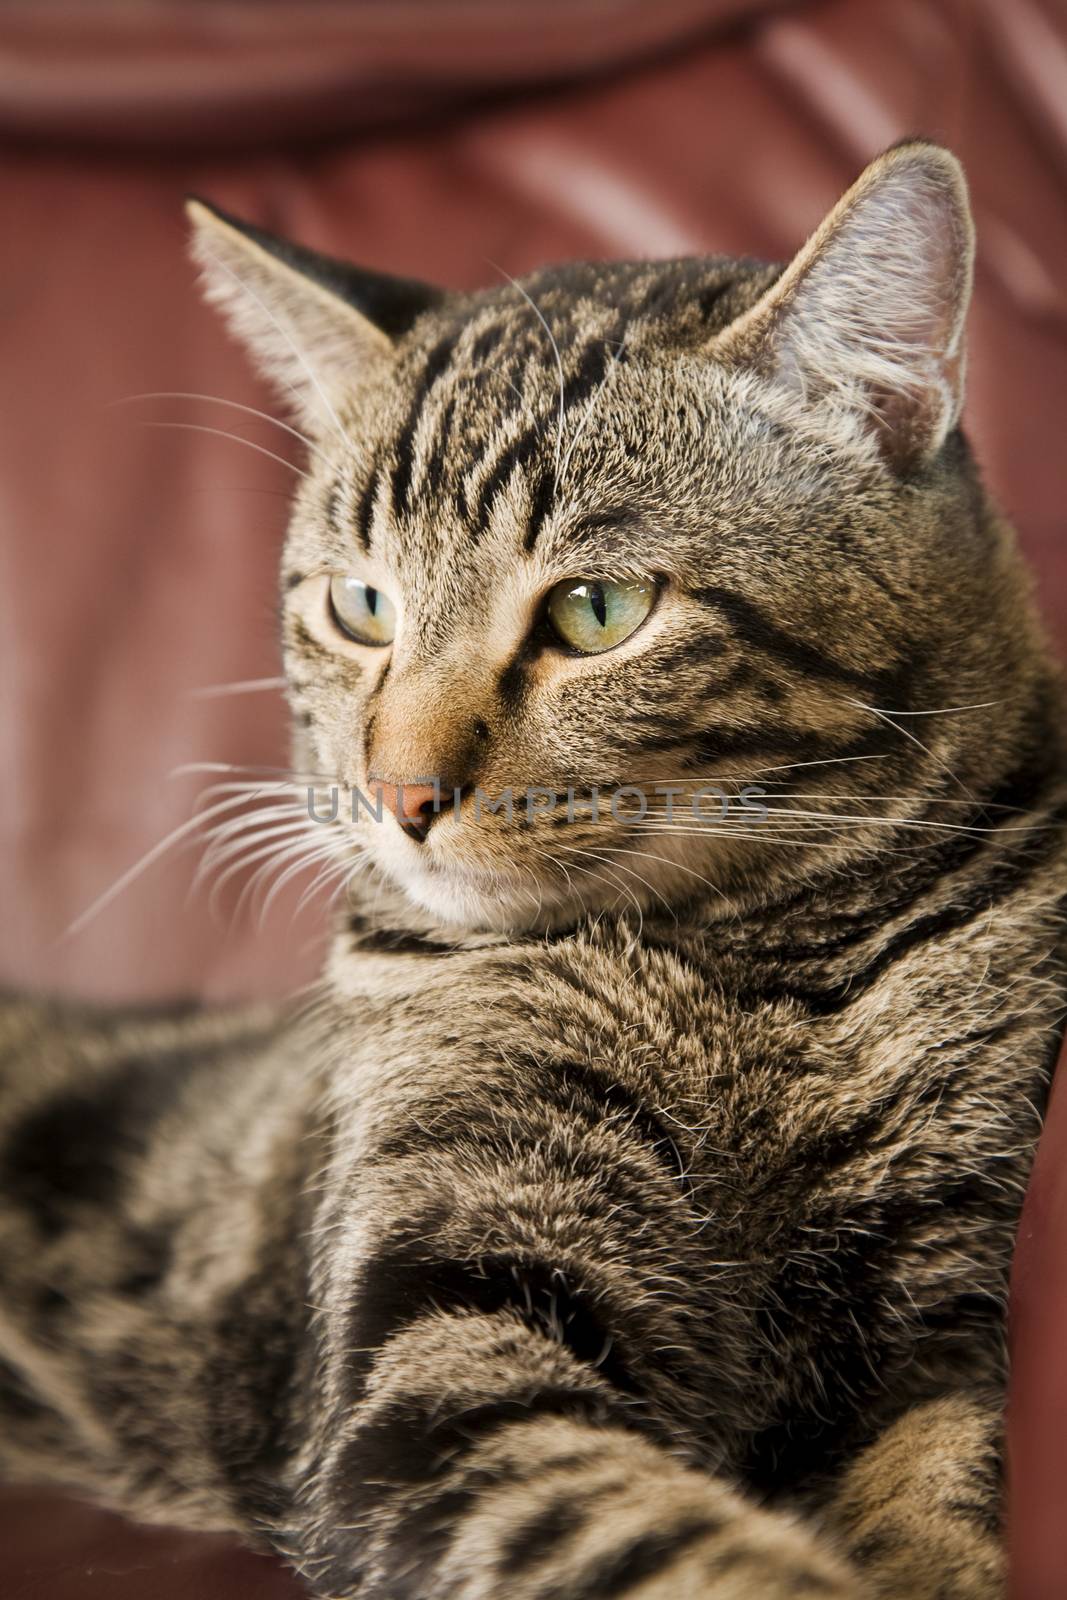 A male tabby cat laying on a leather chair.  Shallow DOF.